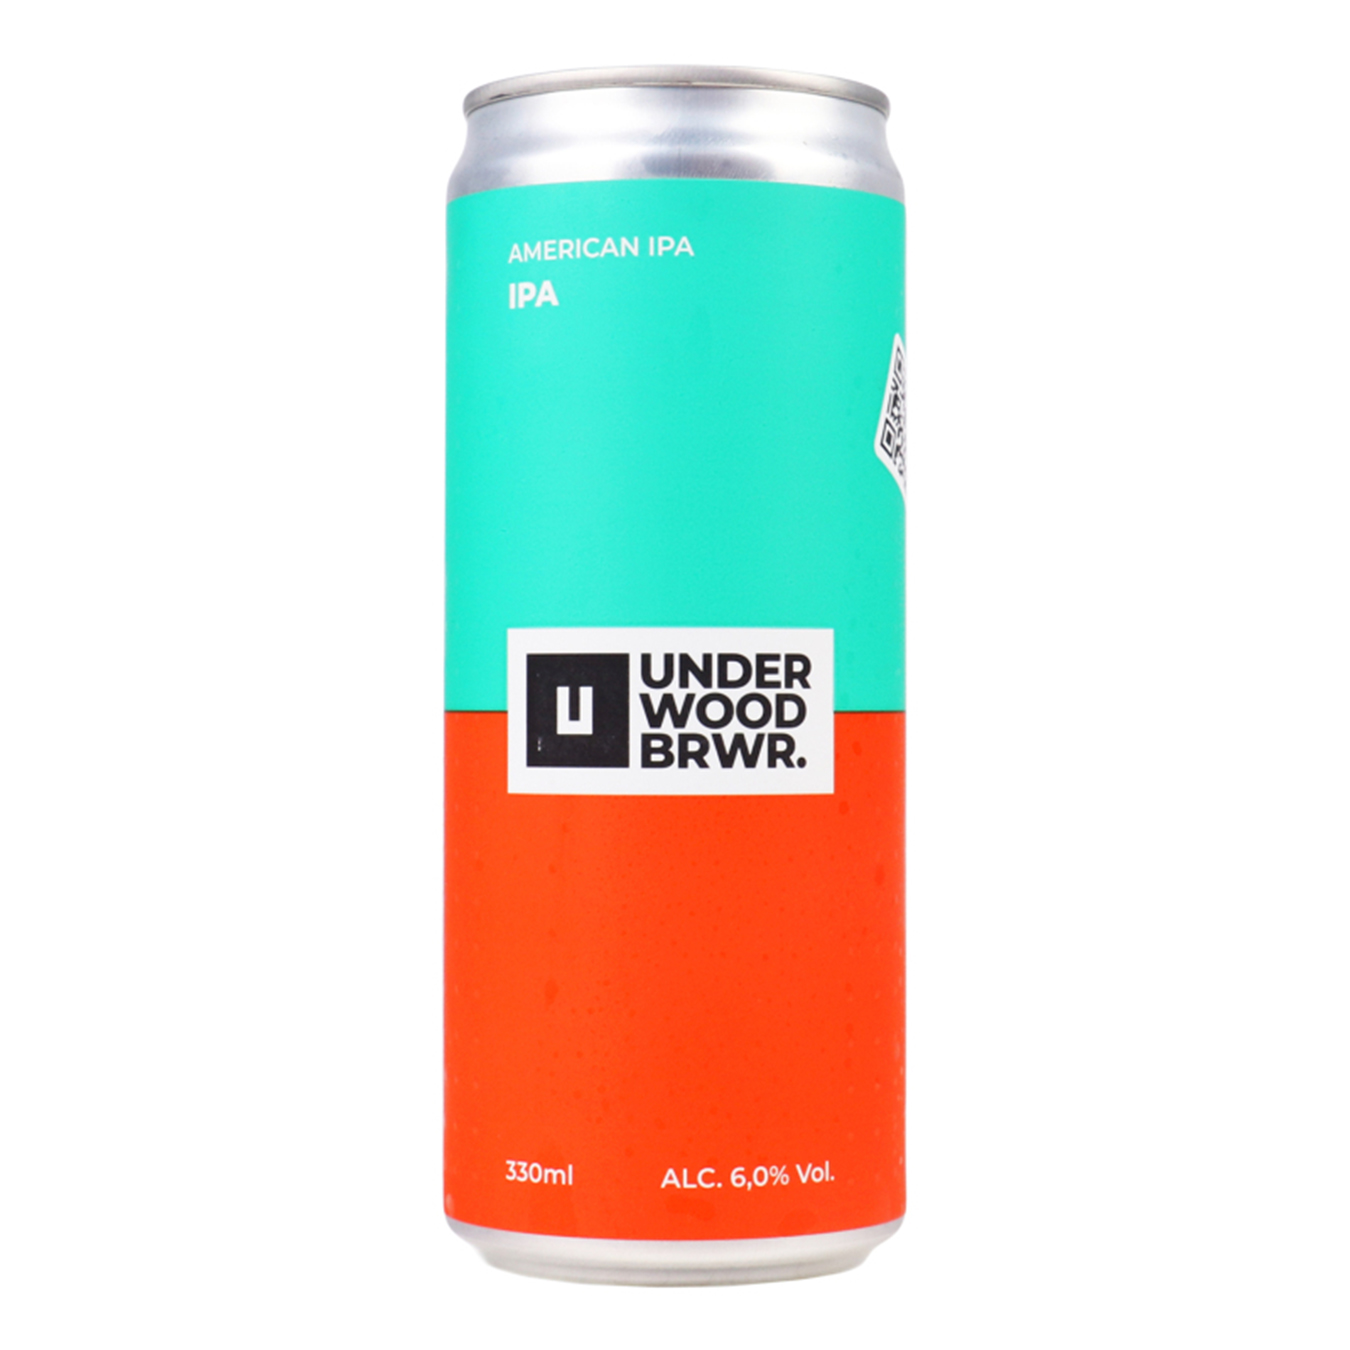 Light beer Underwood BREWERY IPA 6% 0.33 l iron can